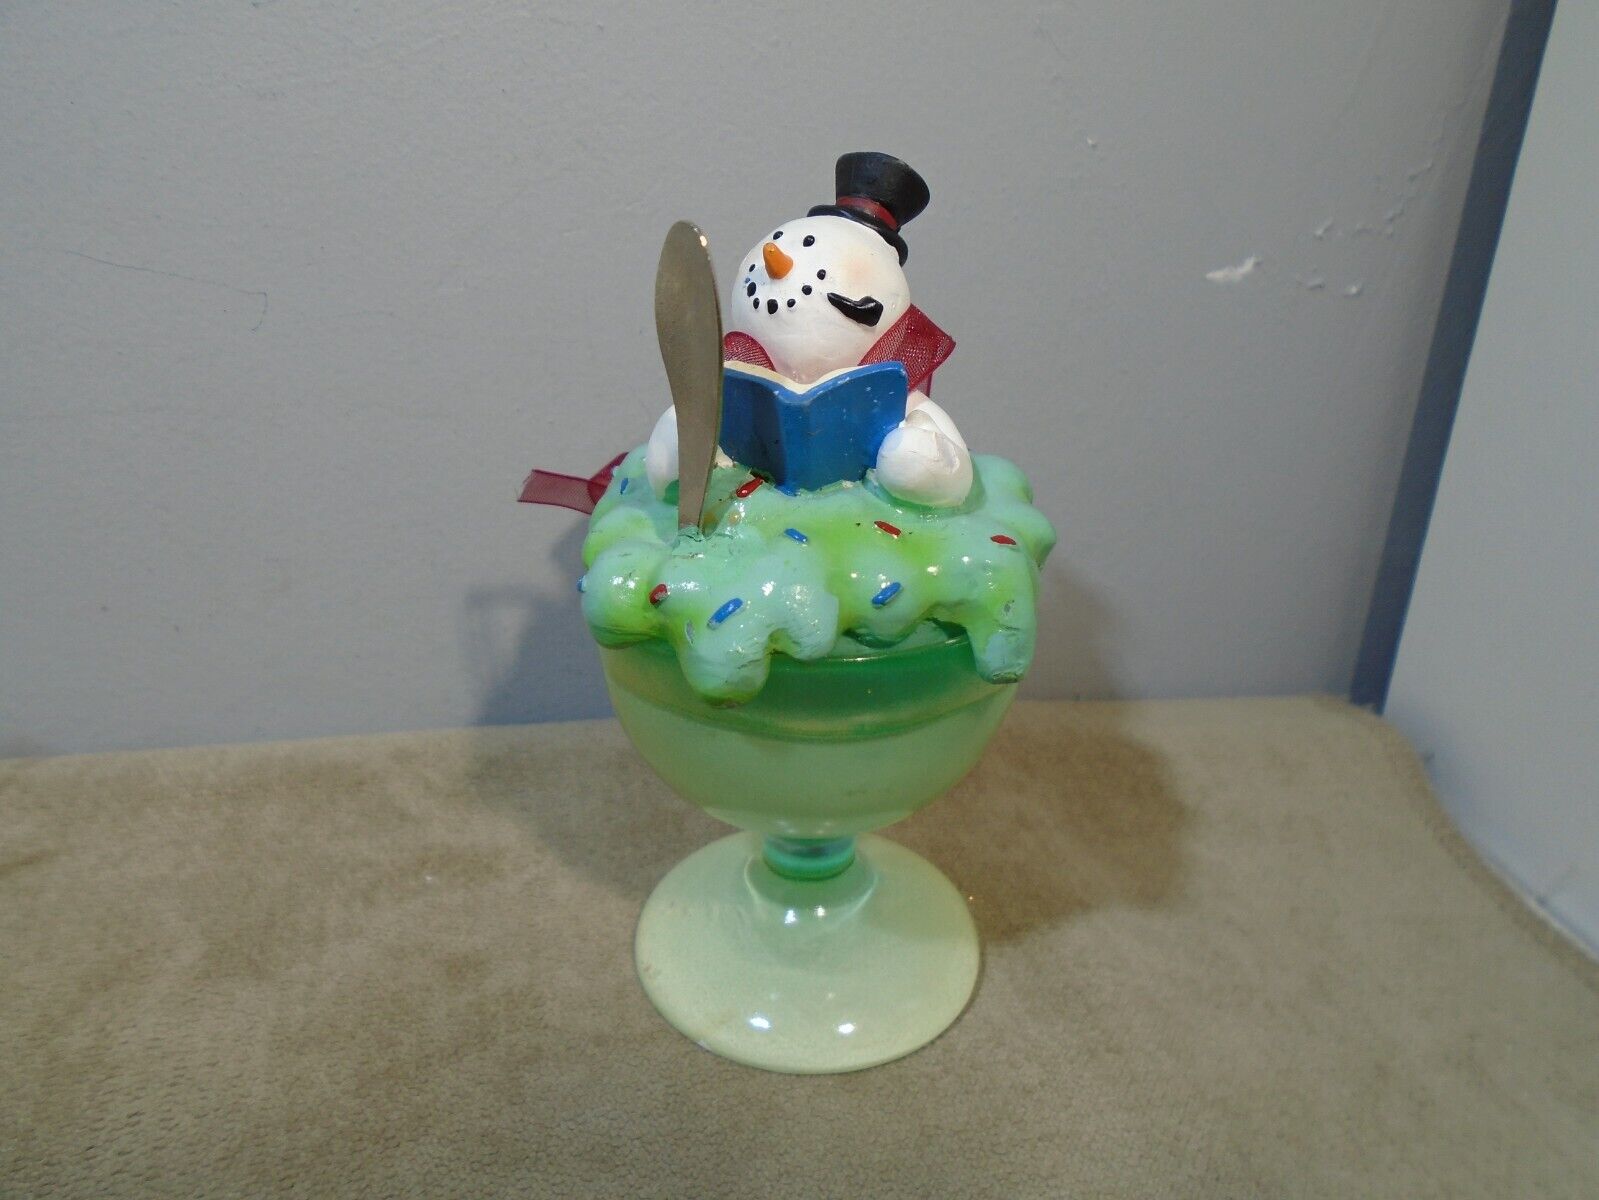 SNOWMAN READING IN A GREEN HOLIDAY BUBBLE BATH SUNDAE 3.5” ORNAMENT UNBRANDED